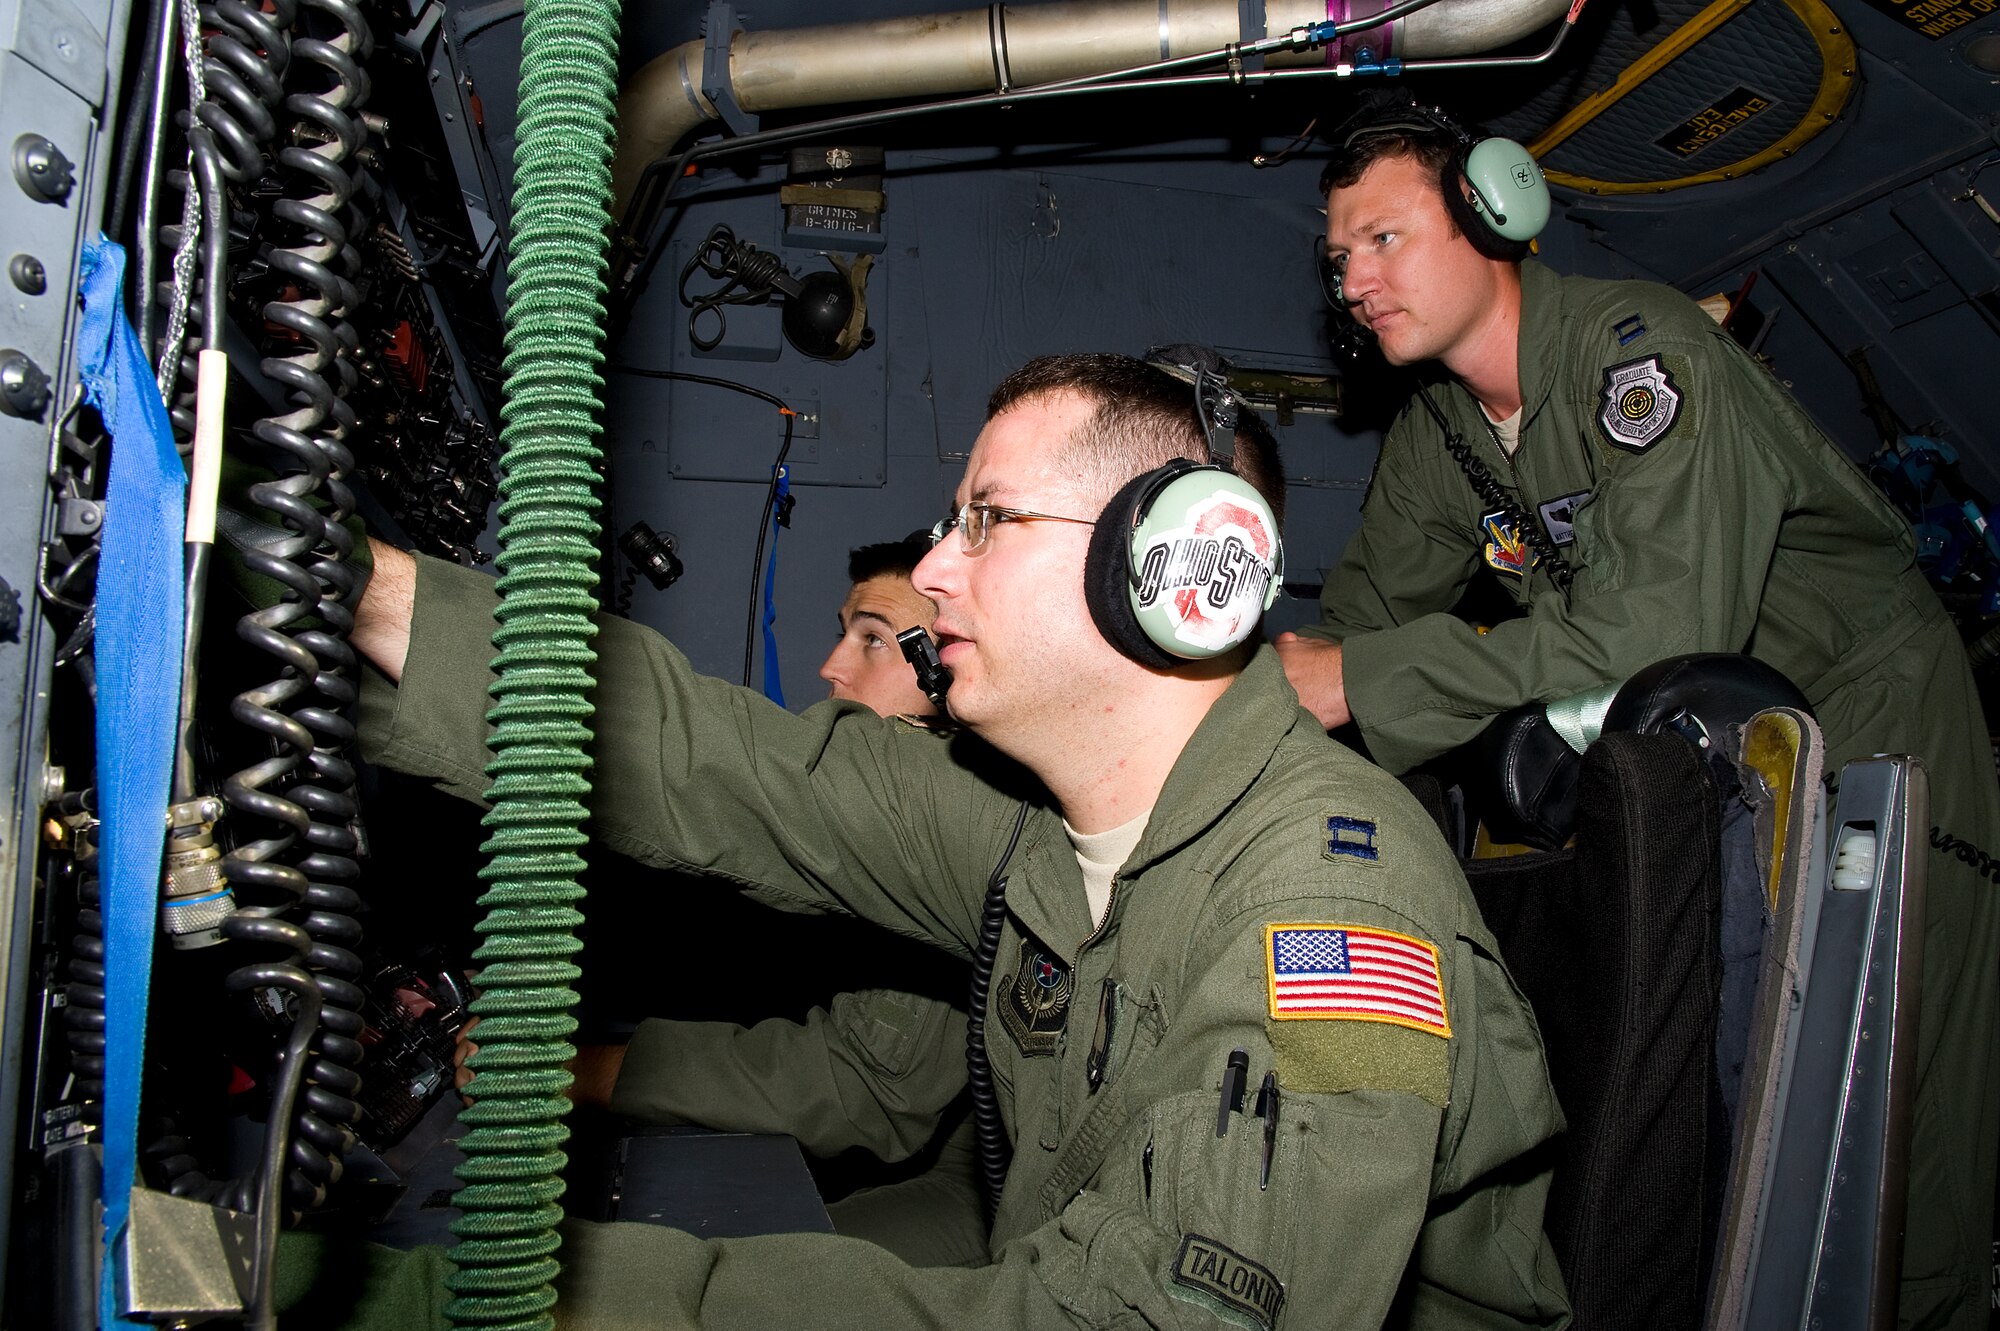 U.S. Air Force Capt. Matthew Prochazka, a MC-130H instructor navigator of 14th Weapons Squadron, instructs Airmen on techniques for integrating flight platforms at Hurlburt Field, Fla., Oct. 11,2012. Integration is also fundamental in creating a well rounded weapons officer and is one of the central tenets of the 14th WPS's course syllabi. (U.S. Air Force Photo/Airman 1st Class Michelle Vickers)